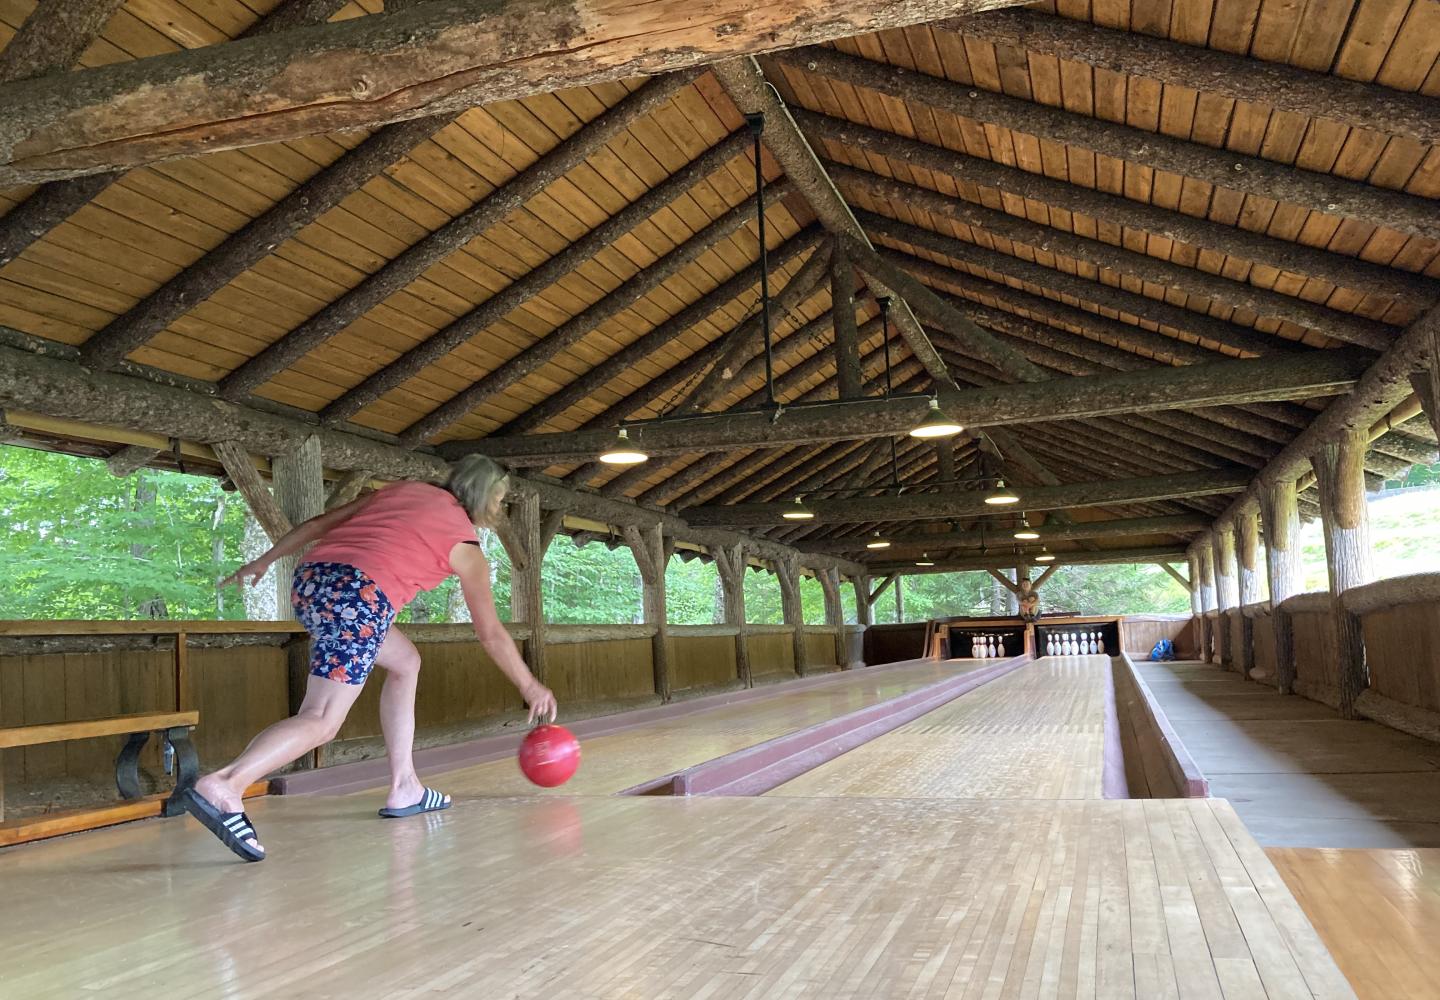 Bowling in the open air lanes. 